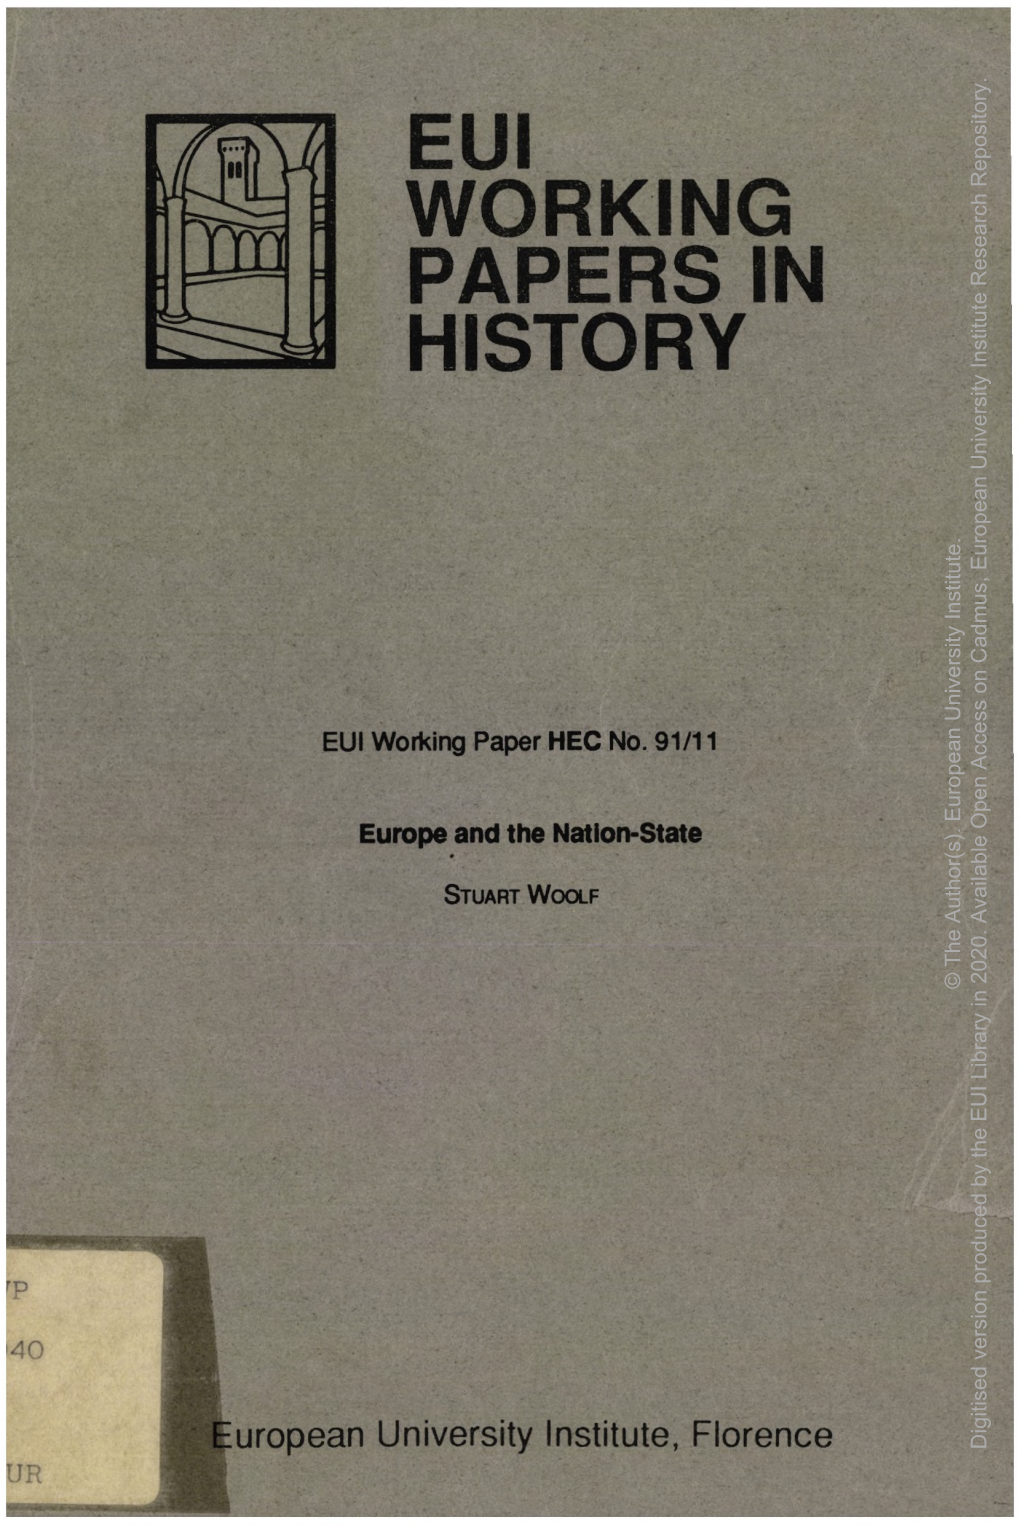 Eui Working Papers in History